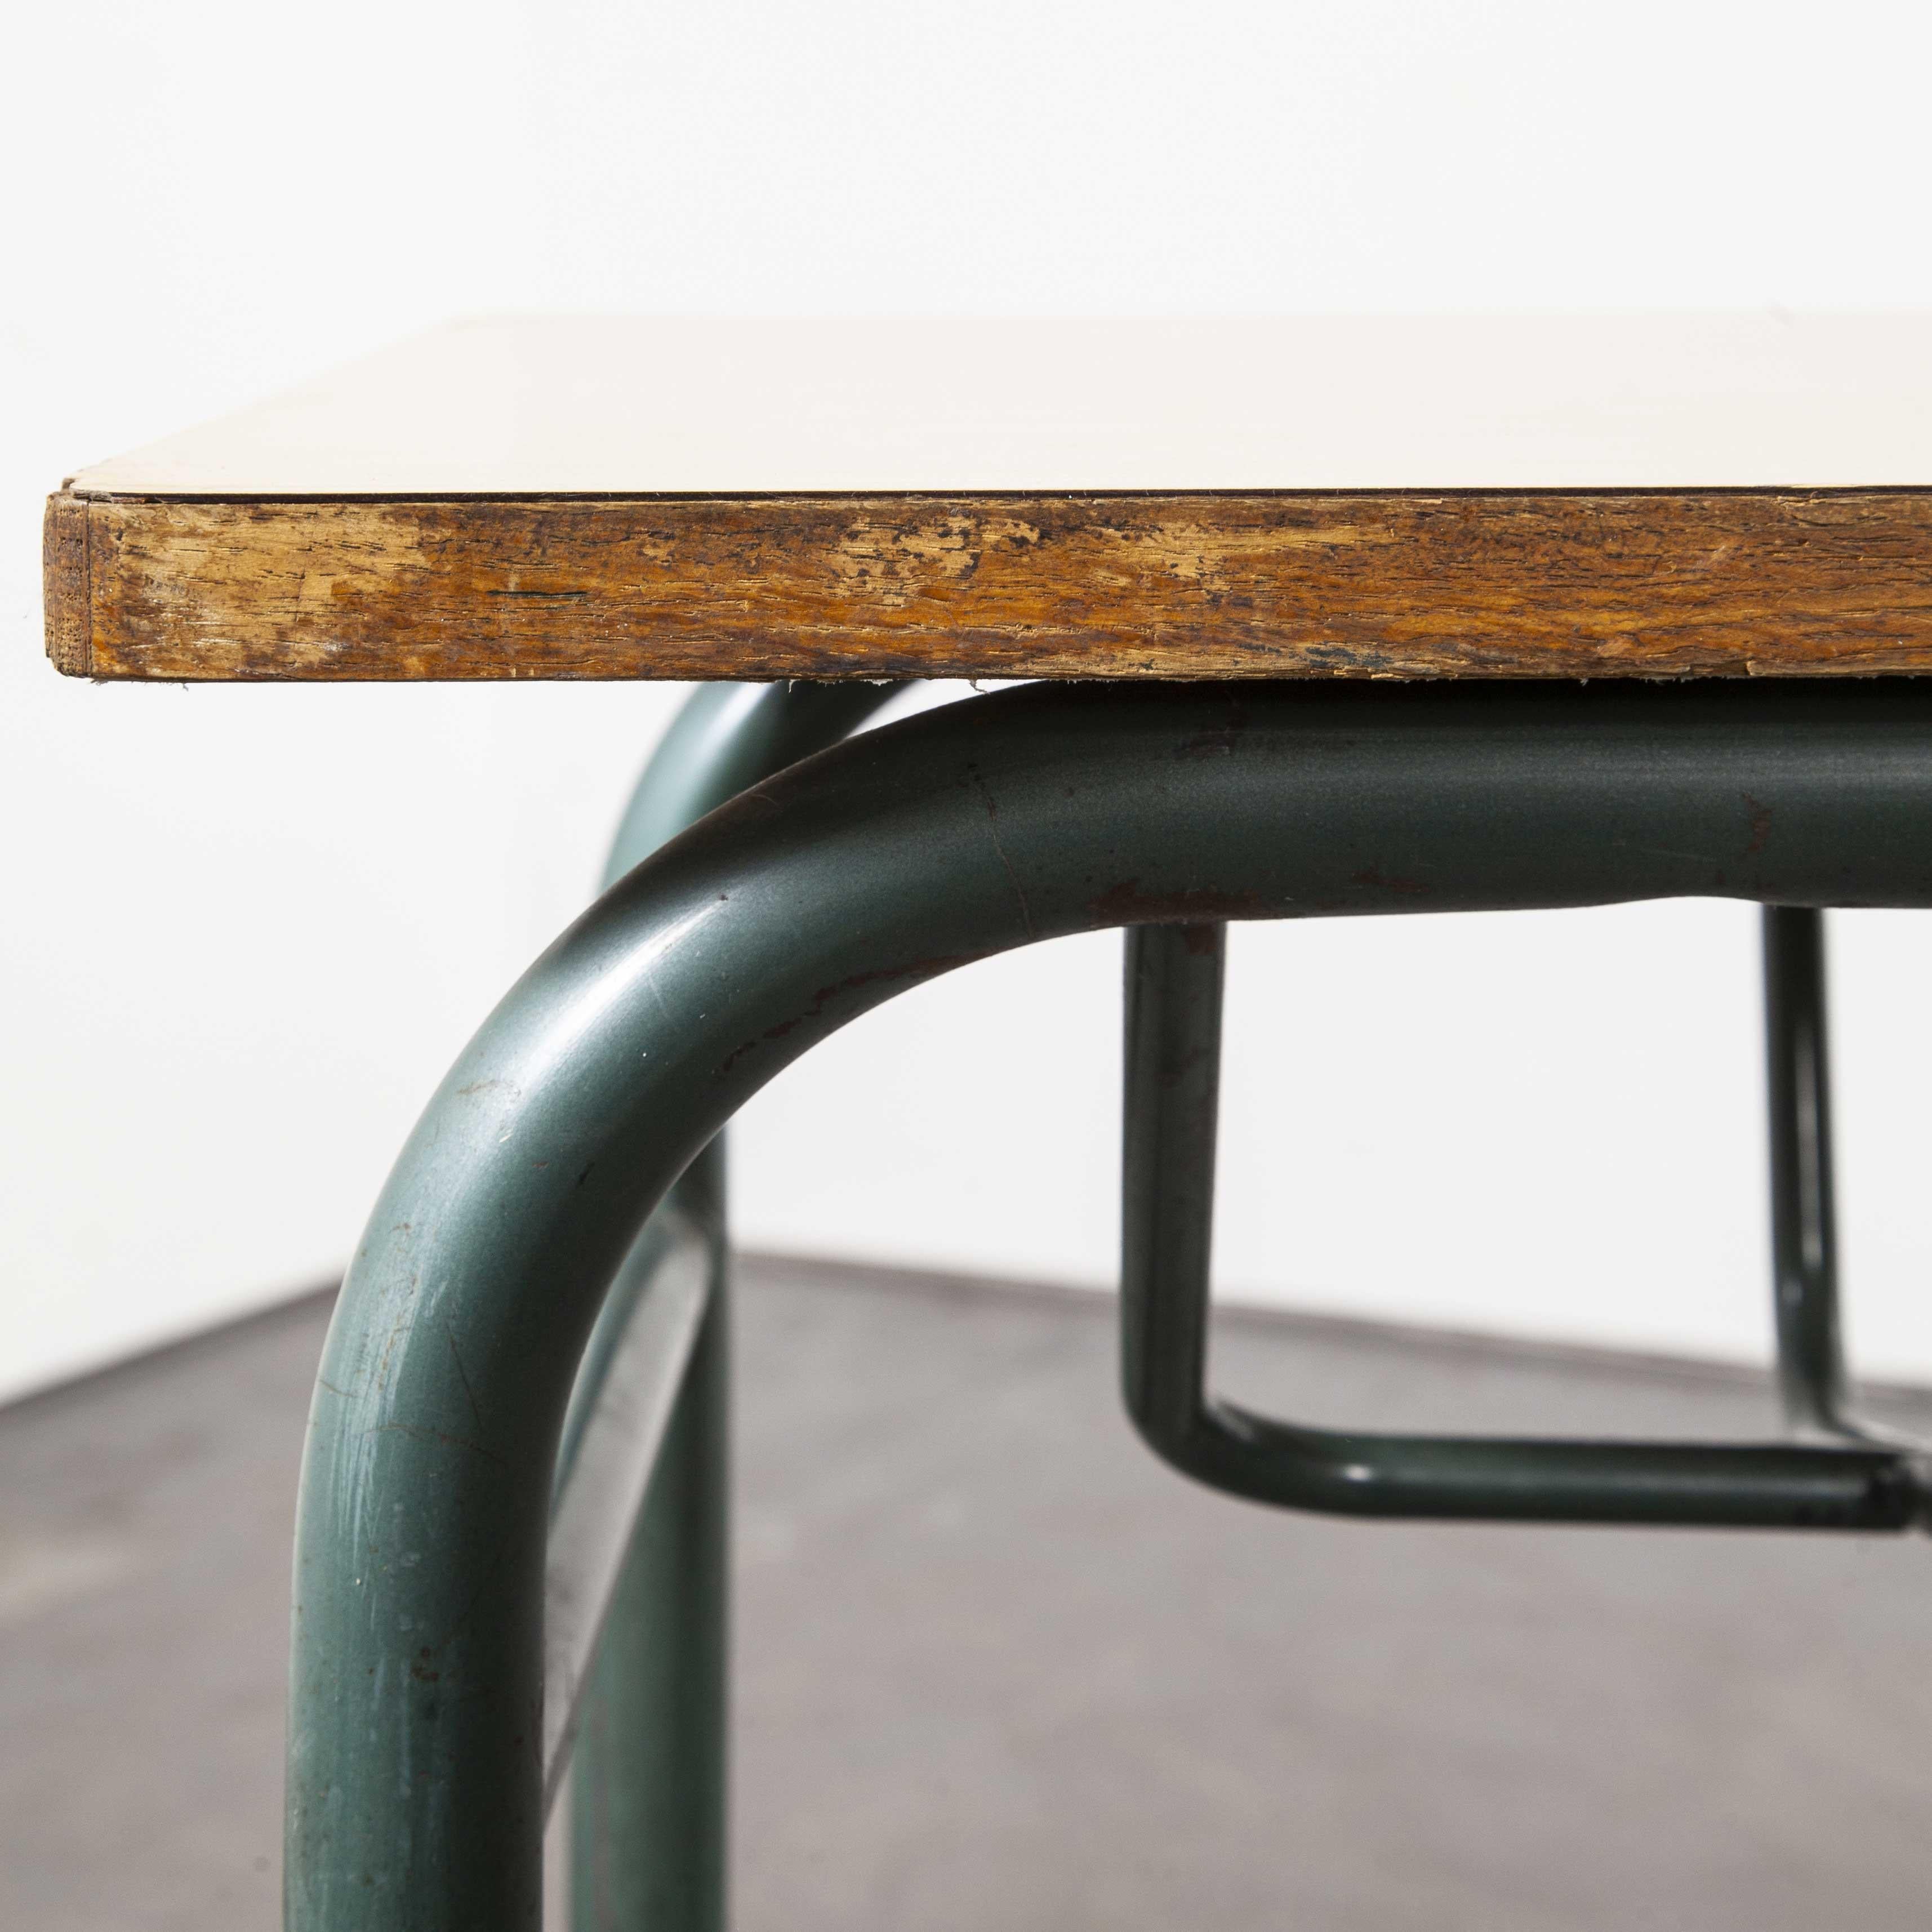 1960s French midcentury Mullca school desk - console table

1960s French midcentury Mullca school desk - console table. In 1947 Robert Muller and Gaston Cavaillon created the company that went on to develop arguably the most famous French school